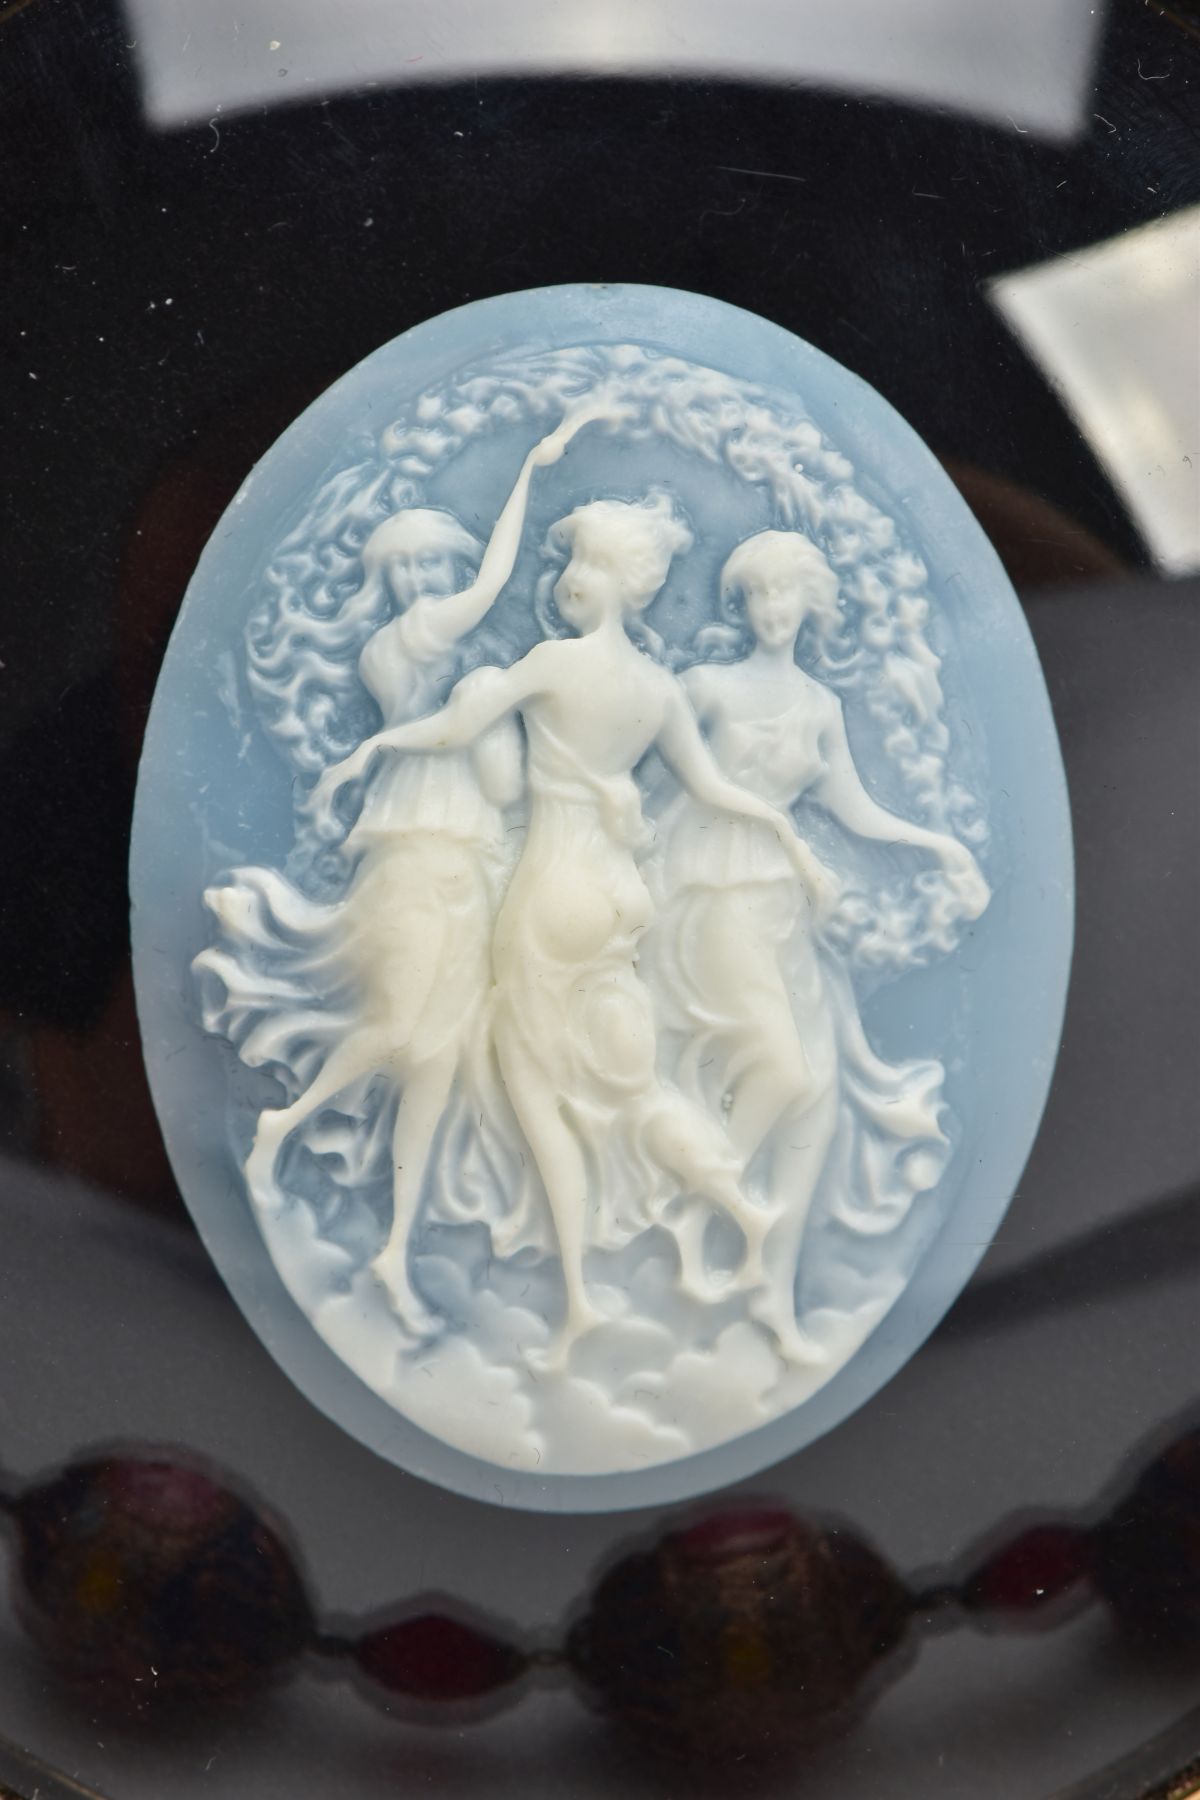 A VENETIAN GLASS BEAD NECKLACE AND A FRAMED THREE GRACES CAMEO, the necklace fitted with thirteen - Image 8 of 8